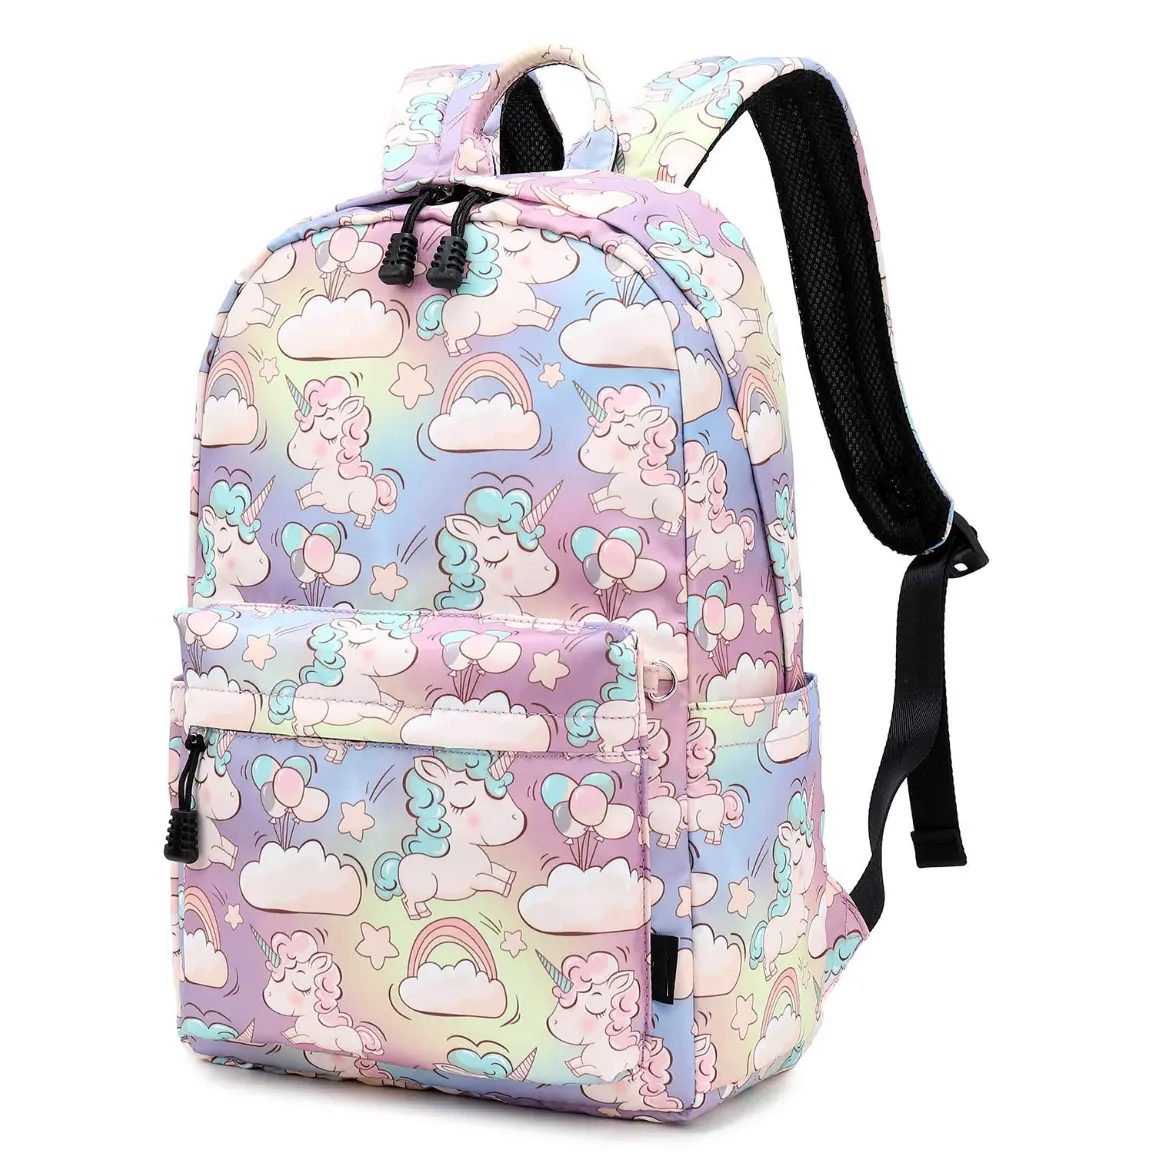 New OEM Custom Breathable Sublimation Backpack For Students Kids School Bags Printing Zipper Multi Pockets Nylon Shoulder Bags